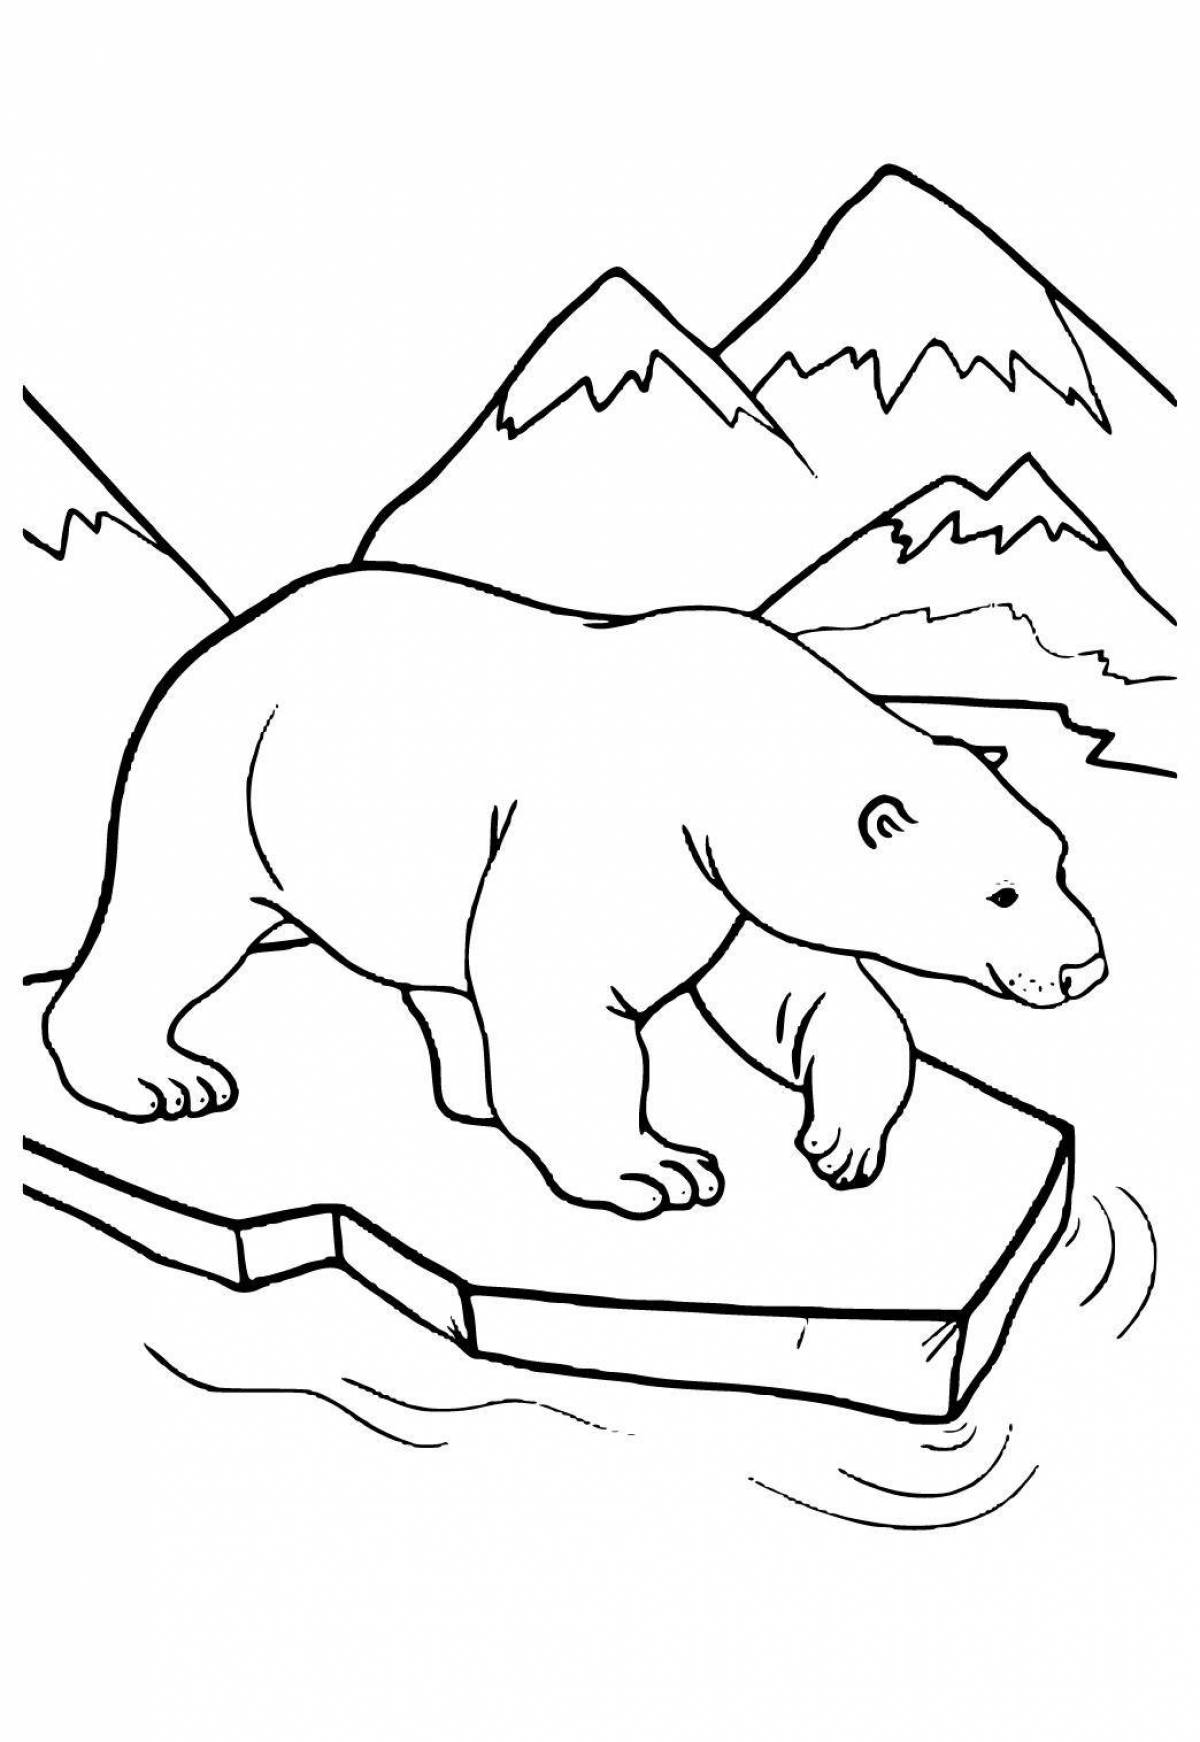 Live ice floe coloring page for kids